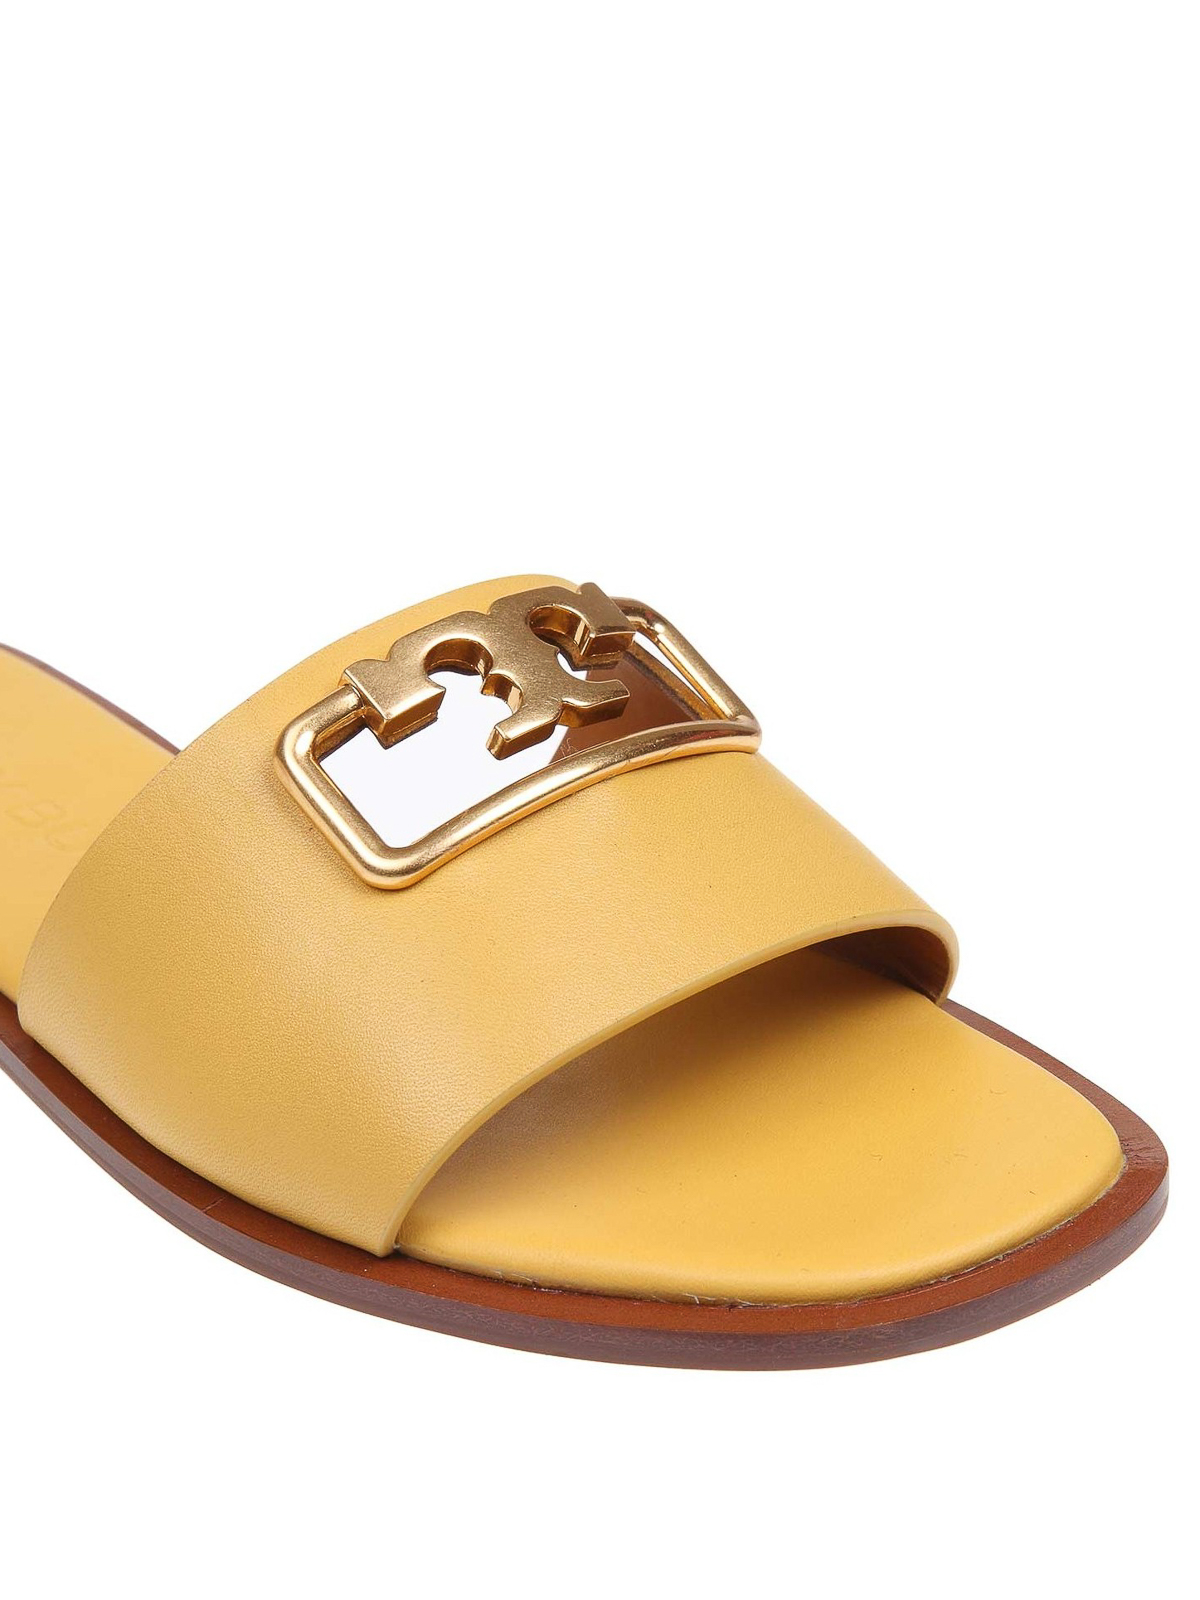 selby slide tory burch